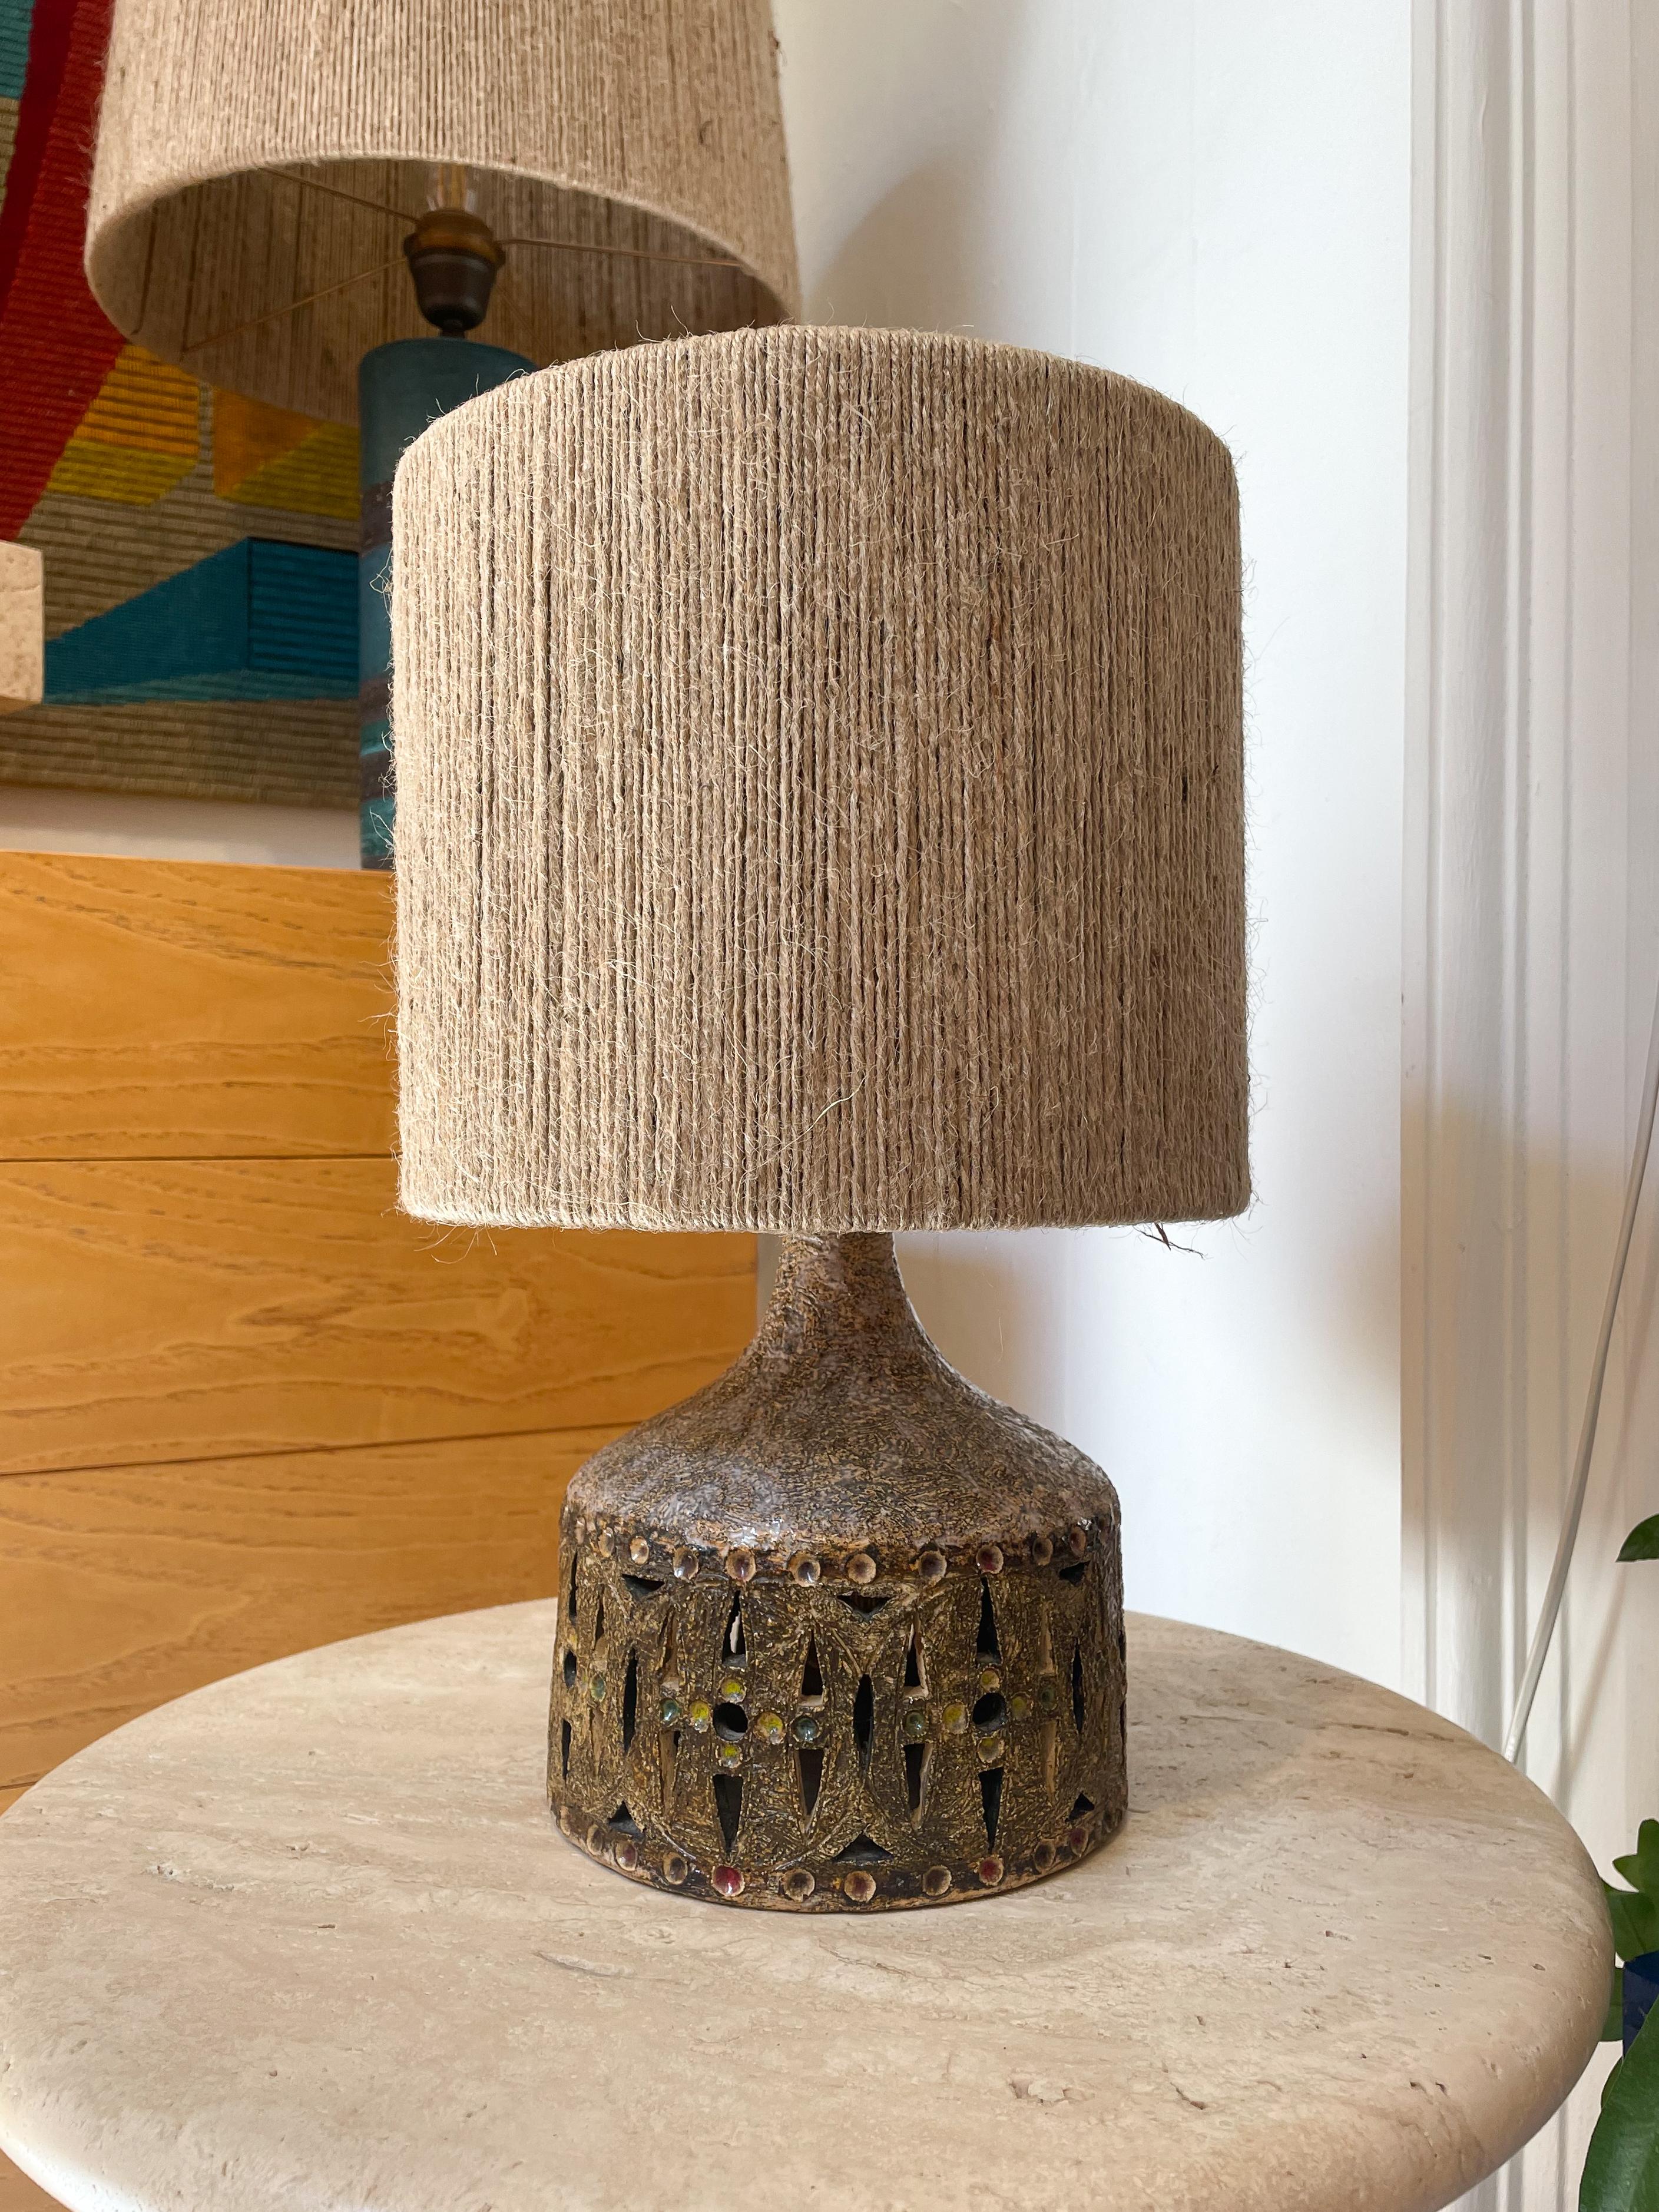 Mid-Century Modern ceramic table lamp in the style of Georges Pelletier, 1960s.